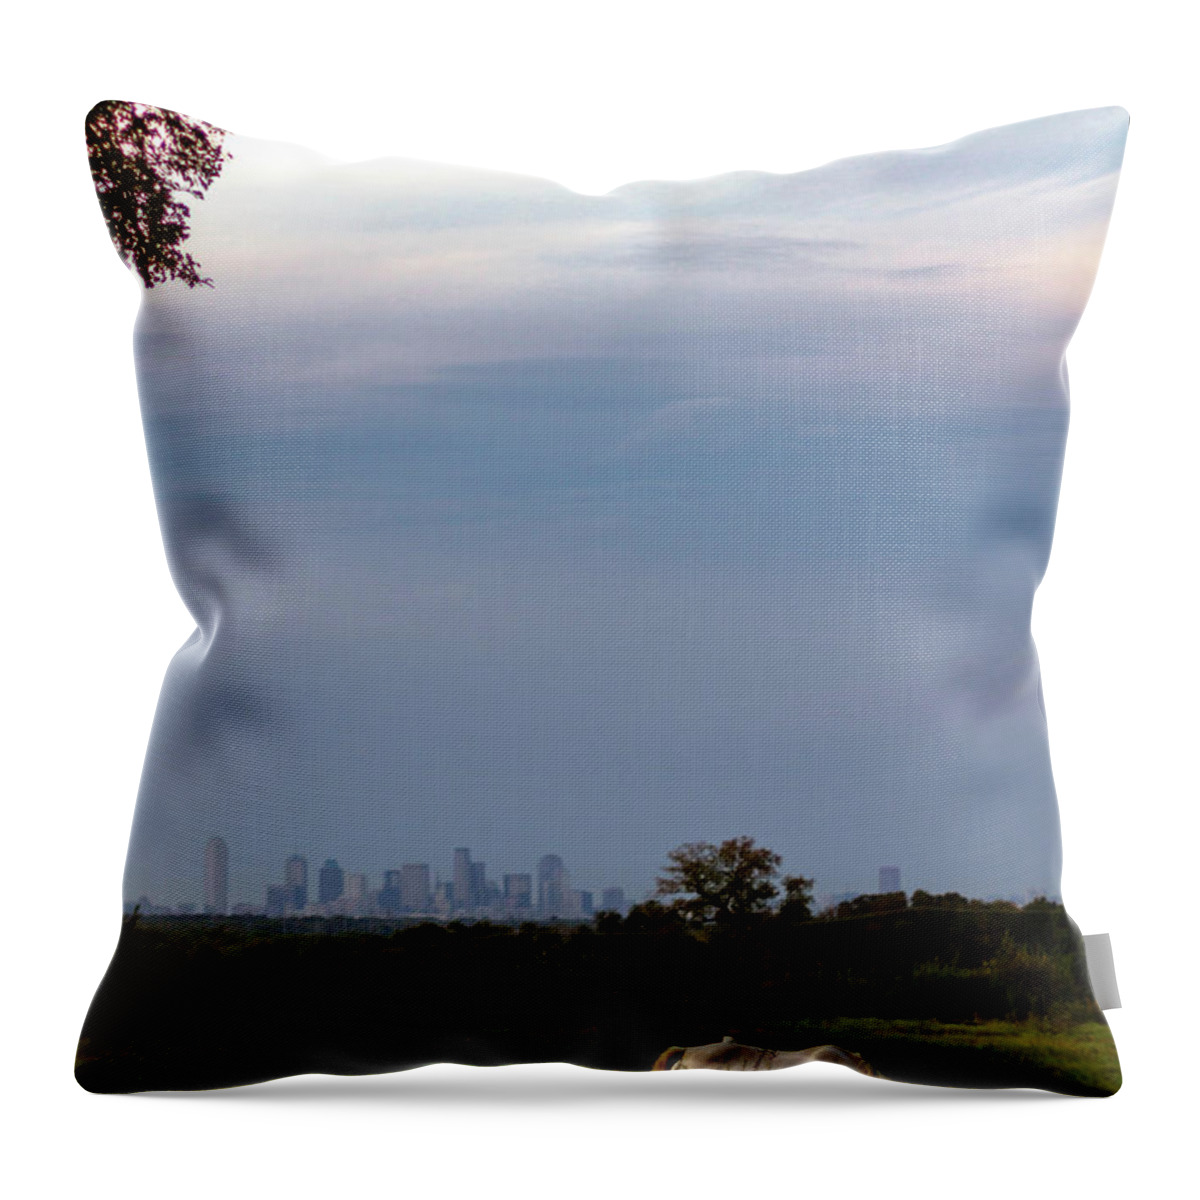 Pasture Throw Pillow featuring the photograph Pasture by Peter Hull